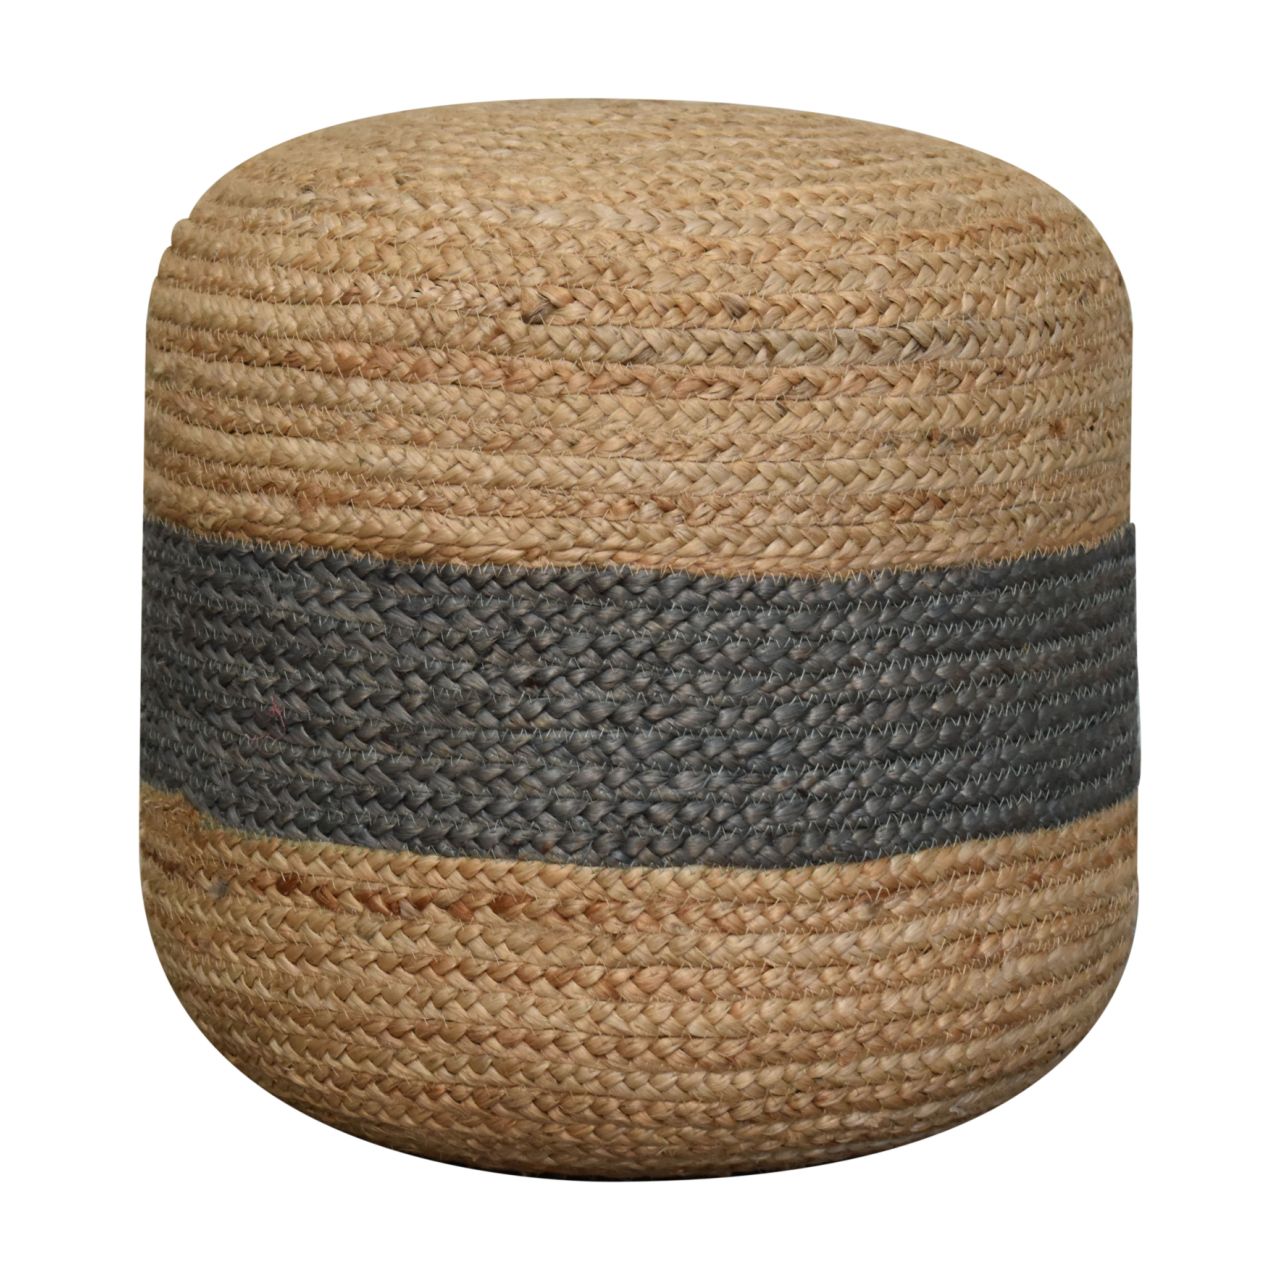 View Jute Pouffe with Green Band information